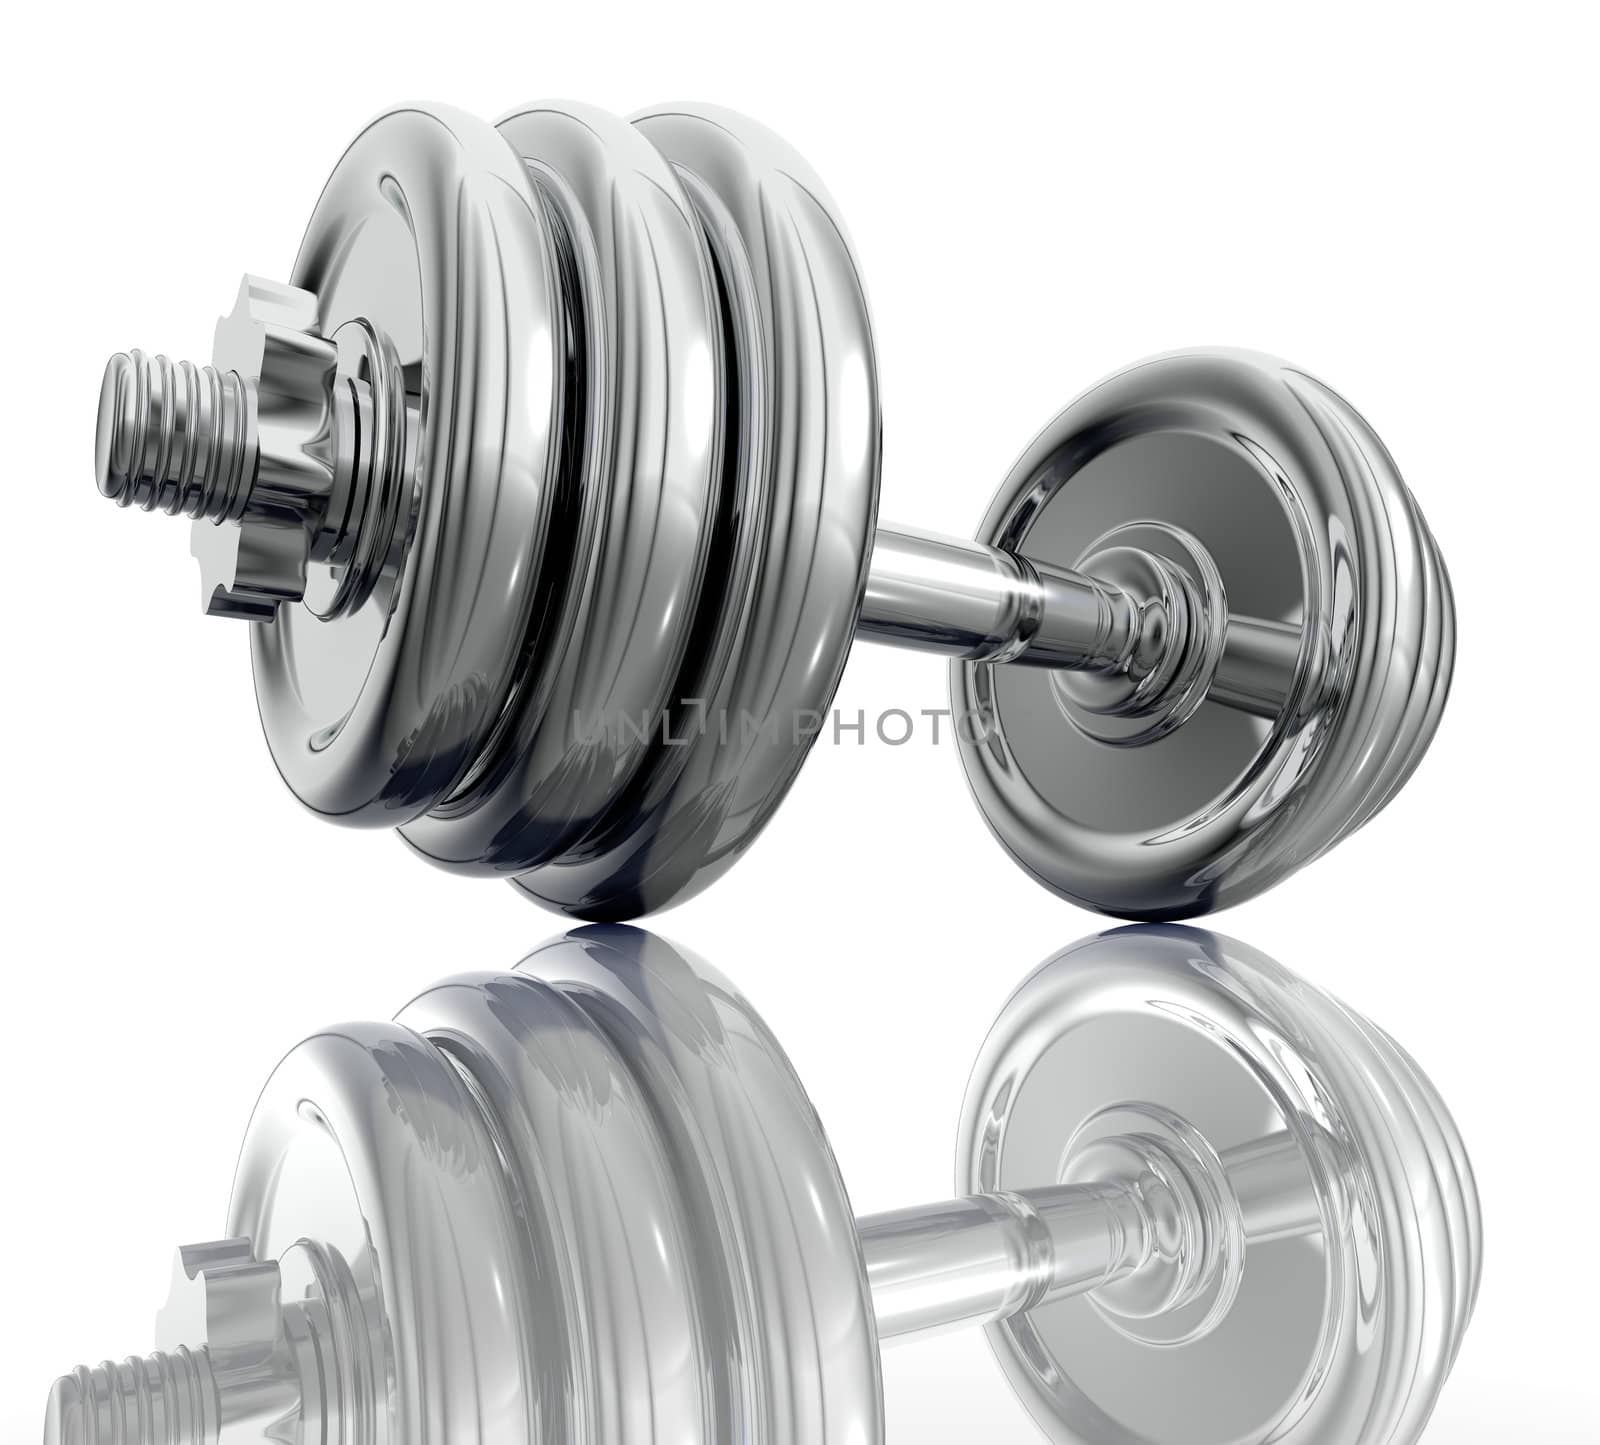 Chromed dumbbell isolated on white background in close up side view. 3d